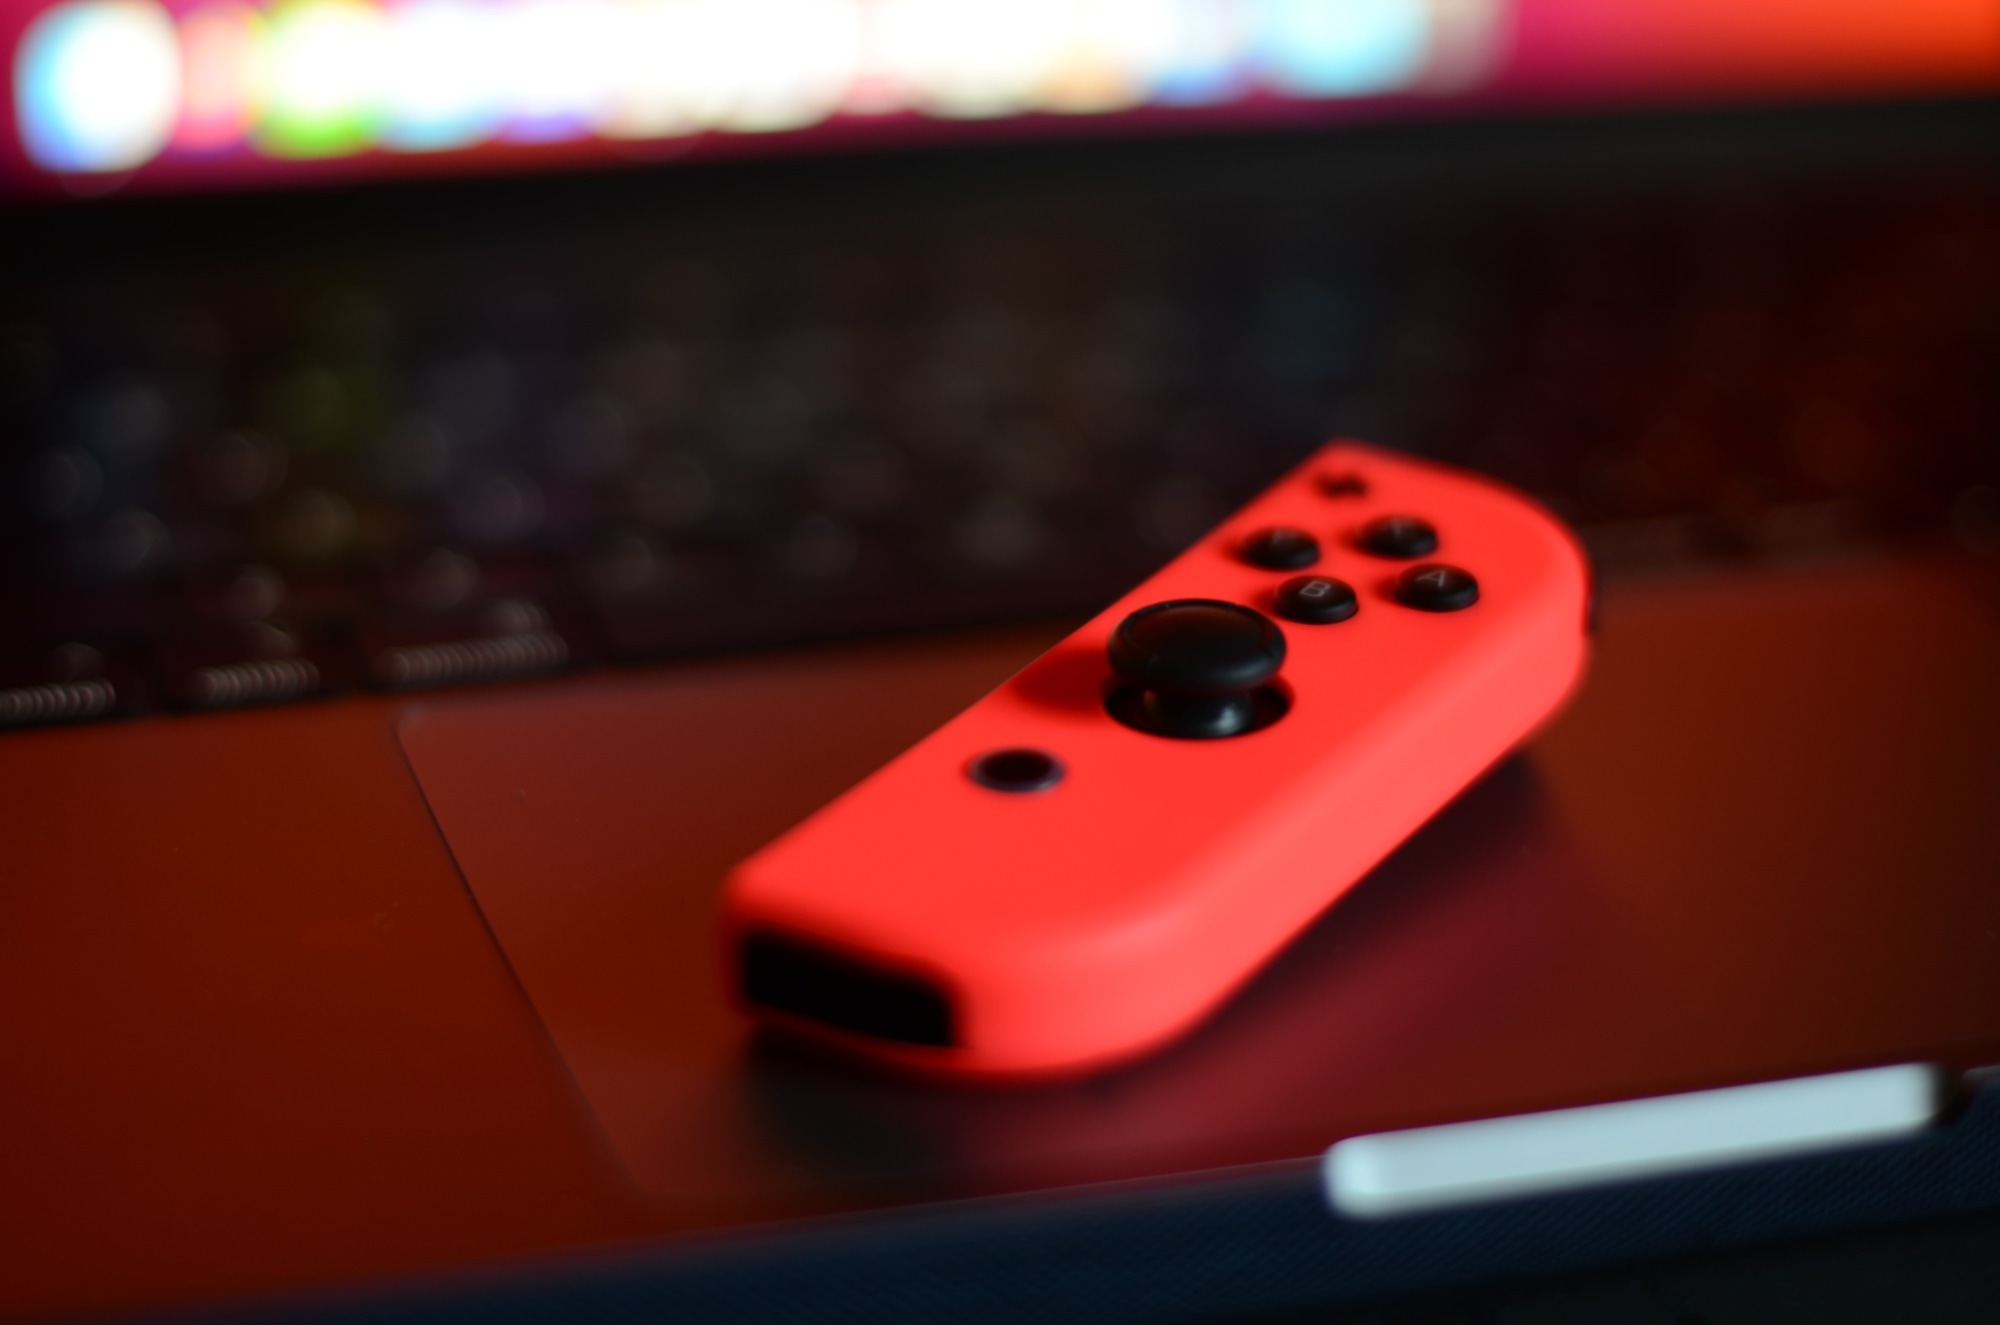 How to pair a Nintendo Joy Con with iPhone